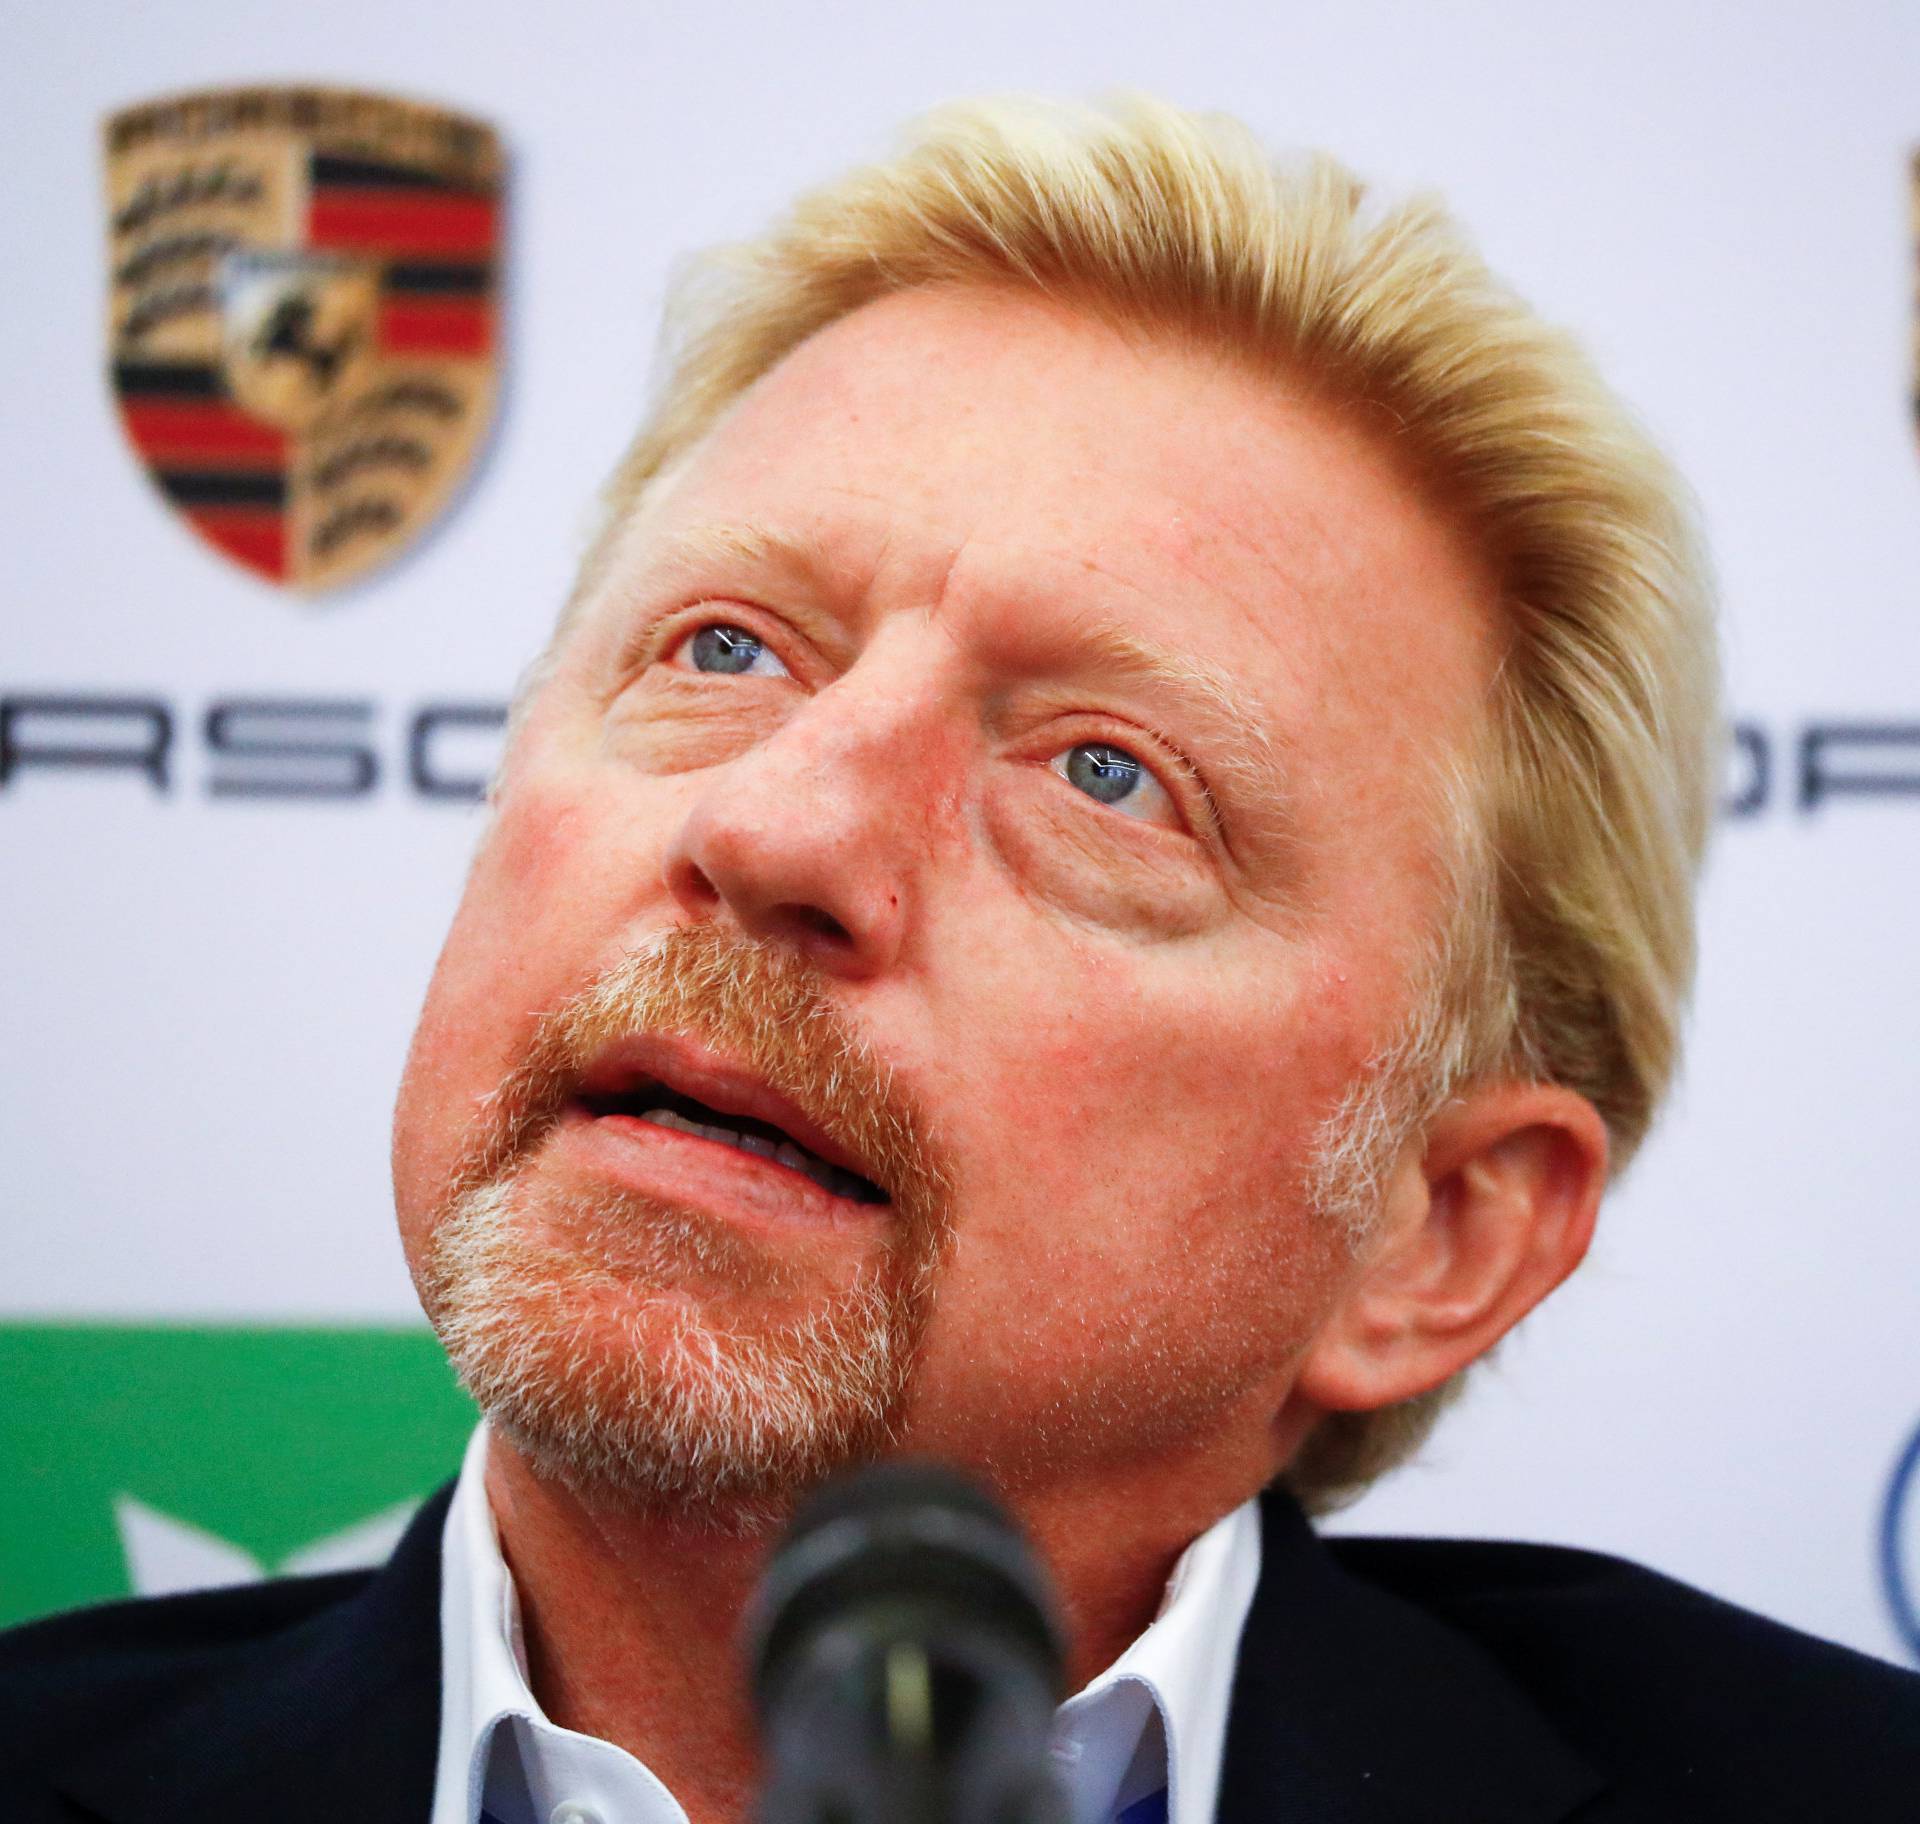 Three-times Wimbledon champion Boris Becker reacts as he is announced as German Tennis Federation's new head of men's tennis during a news conference in Frankfurt